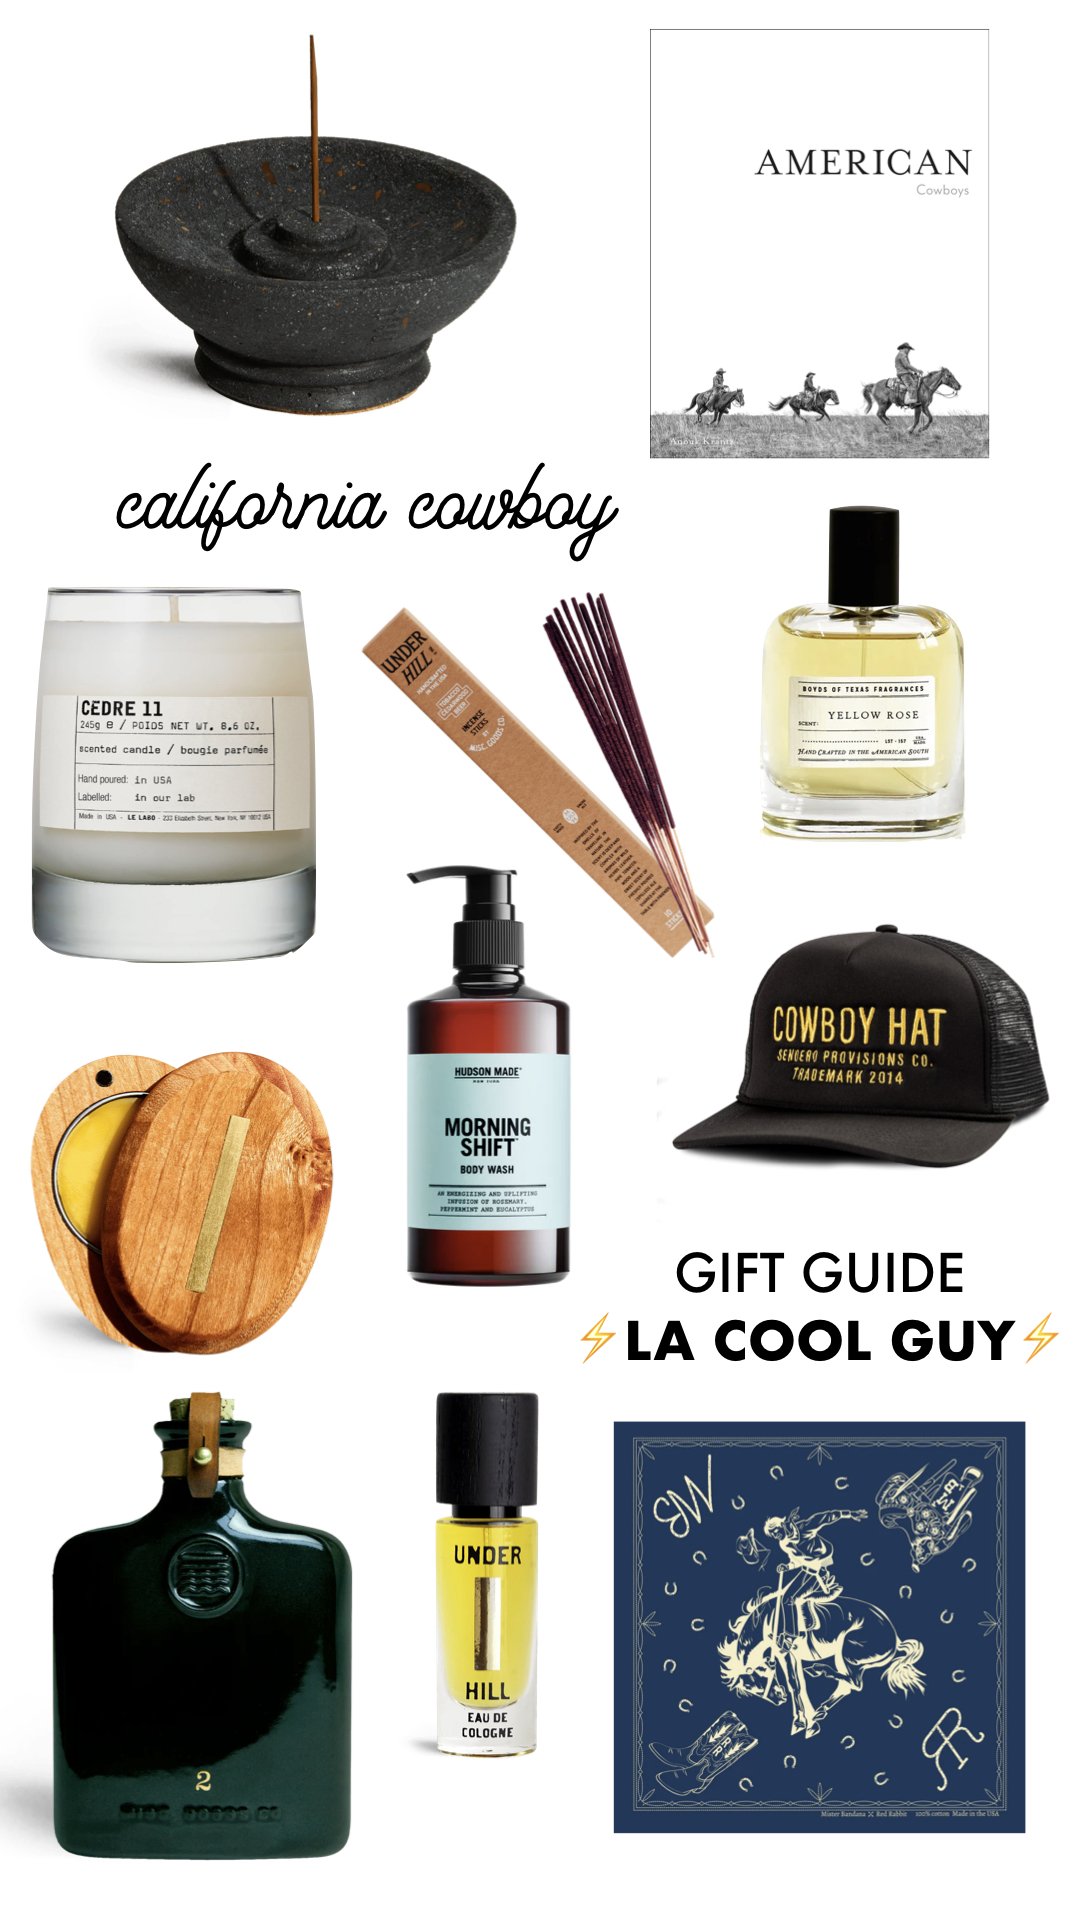 Christmas Gift Guide for your Boyfriend — Julia Elise Collective